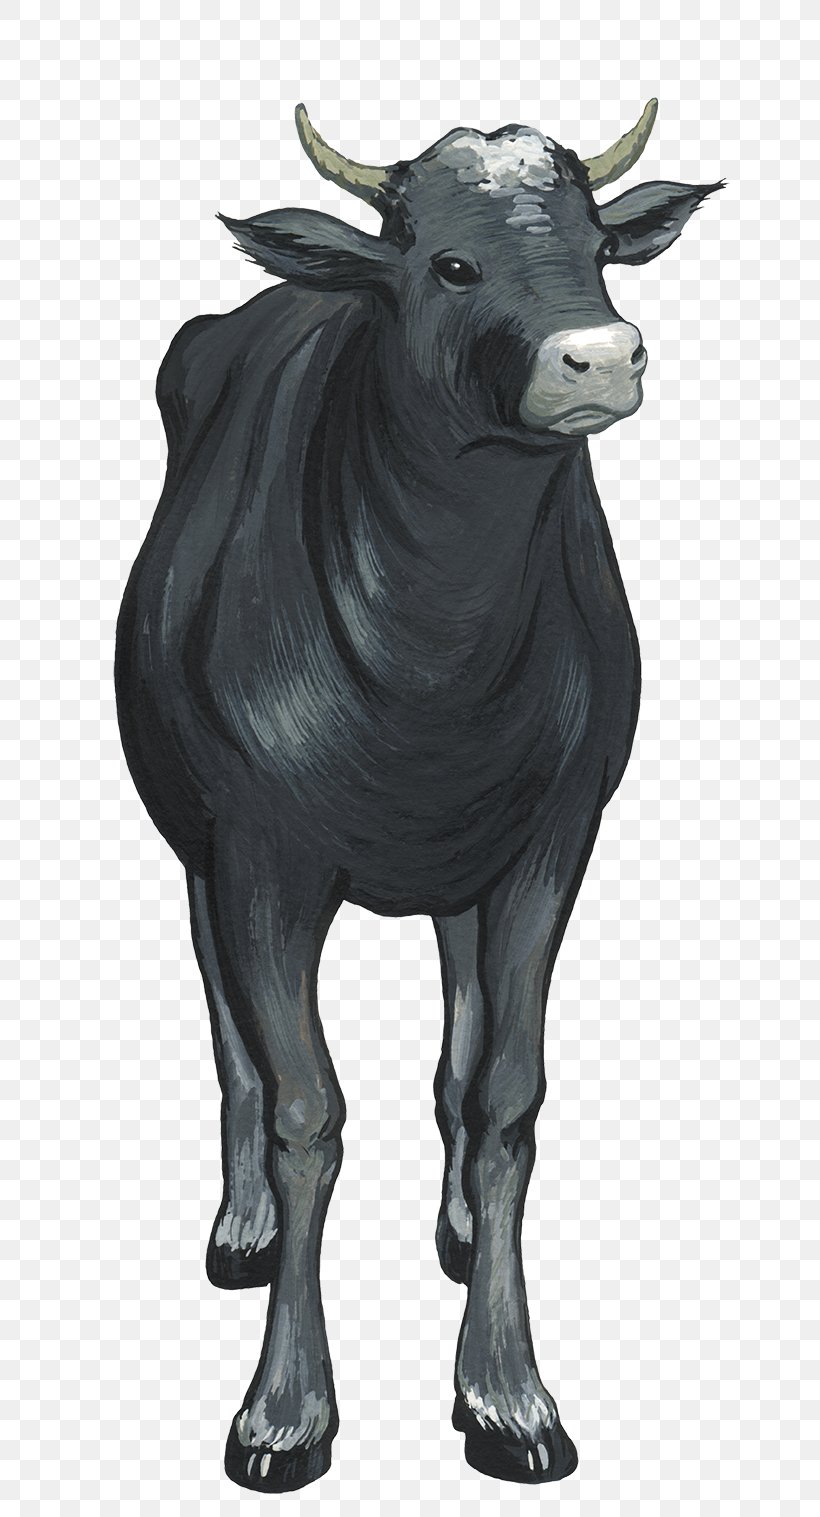 Bull Cattle, PNG, 689x1517px, Bull, Cartoon, Cattle, Cattle Like Mammal, Cow Goat Family Download Free